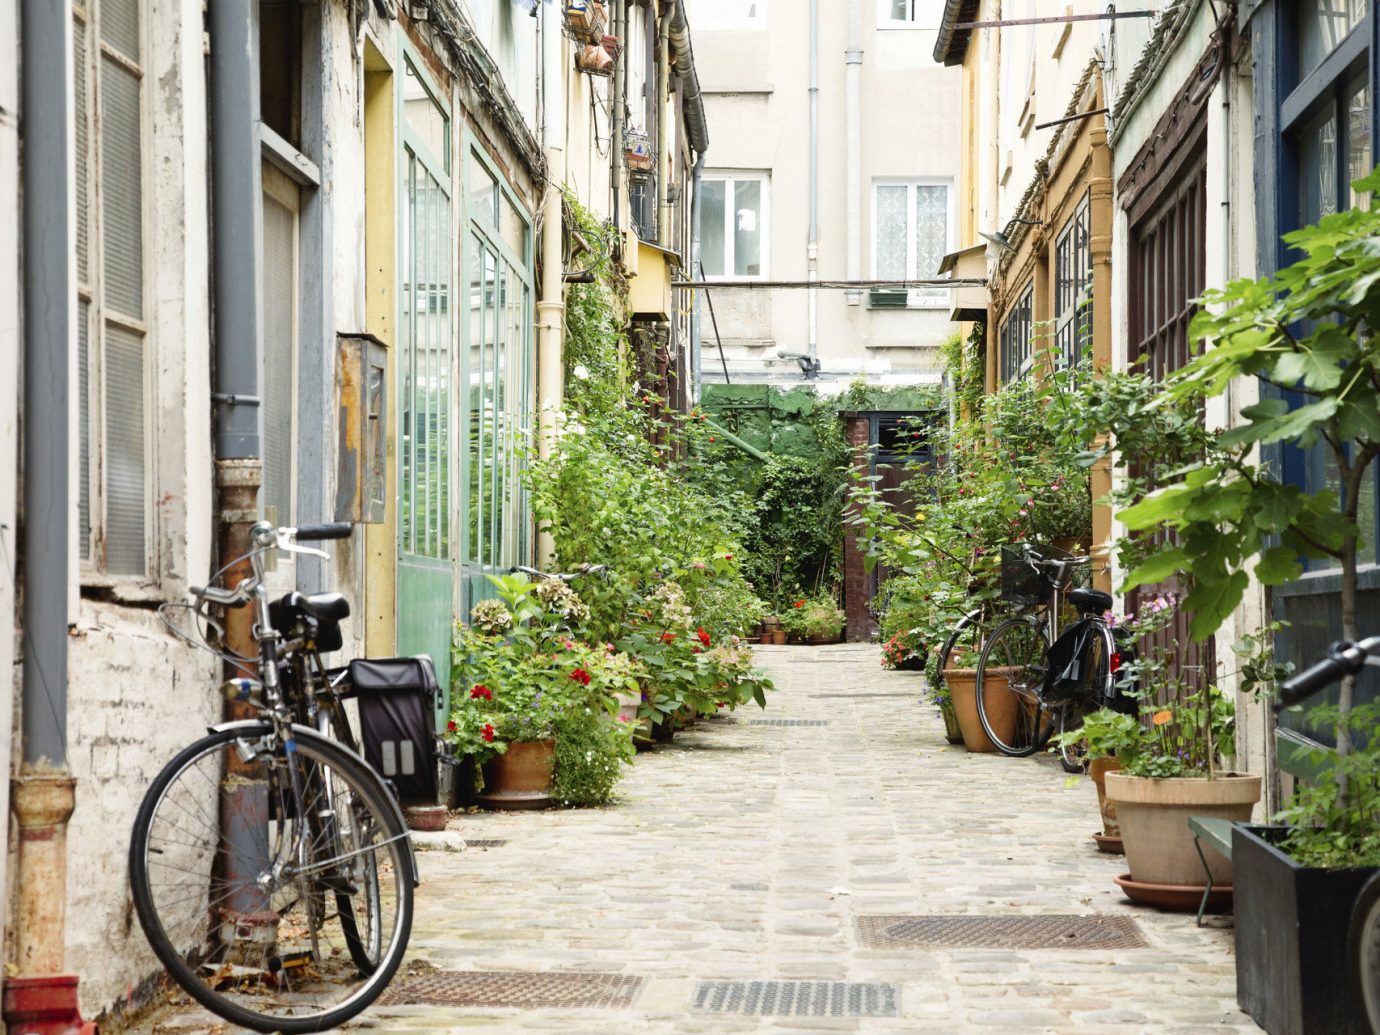 Romance Trip Ideas outdoor bicycle building way road sidewalk parked alley Town street neighbourhood scene lane City urban area human settlement residential area tourism infrastructure Courtyard vehicle flower stone scooter curb